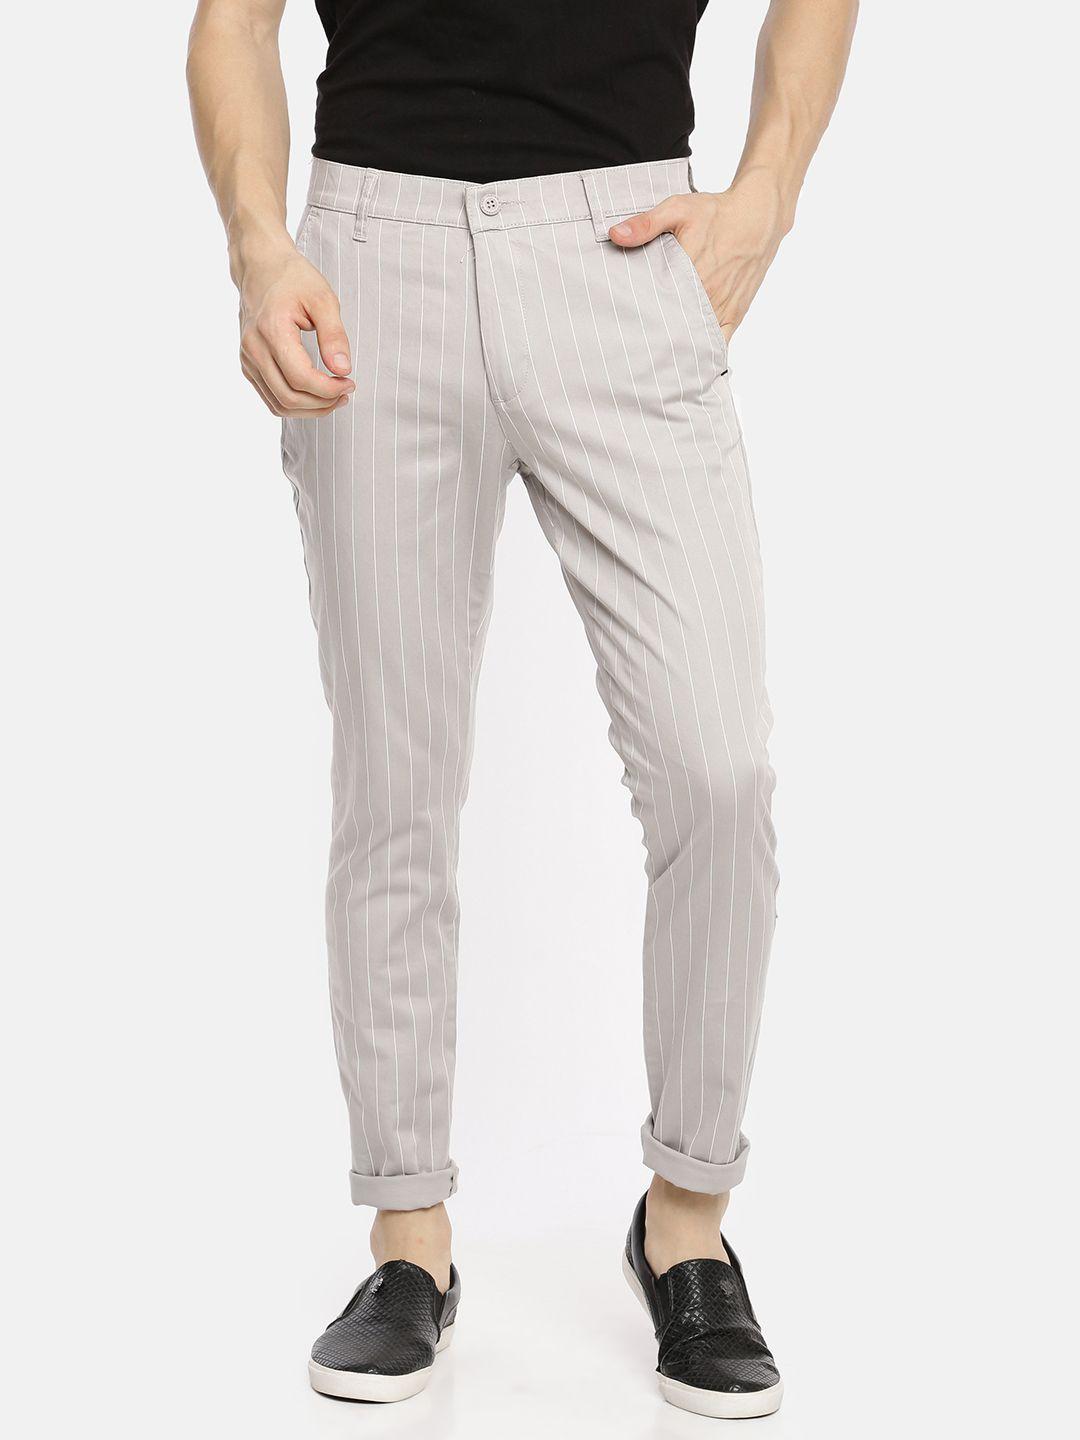 the-indian-garage-co-men-grey-&-white-slim-fit-striped-chinos